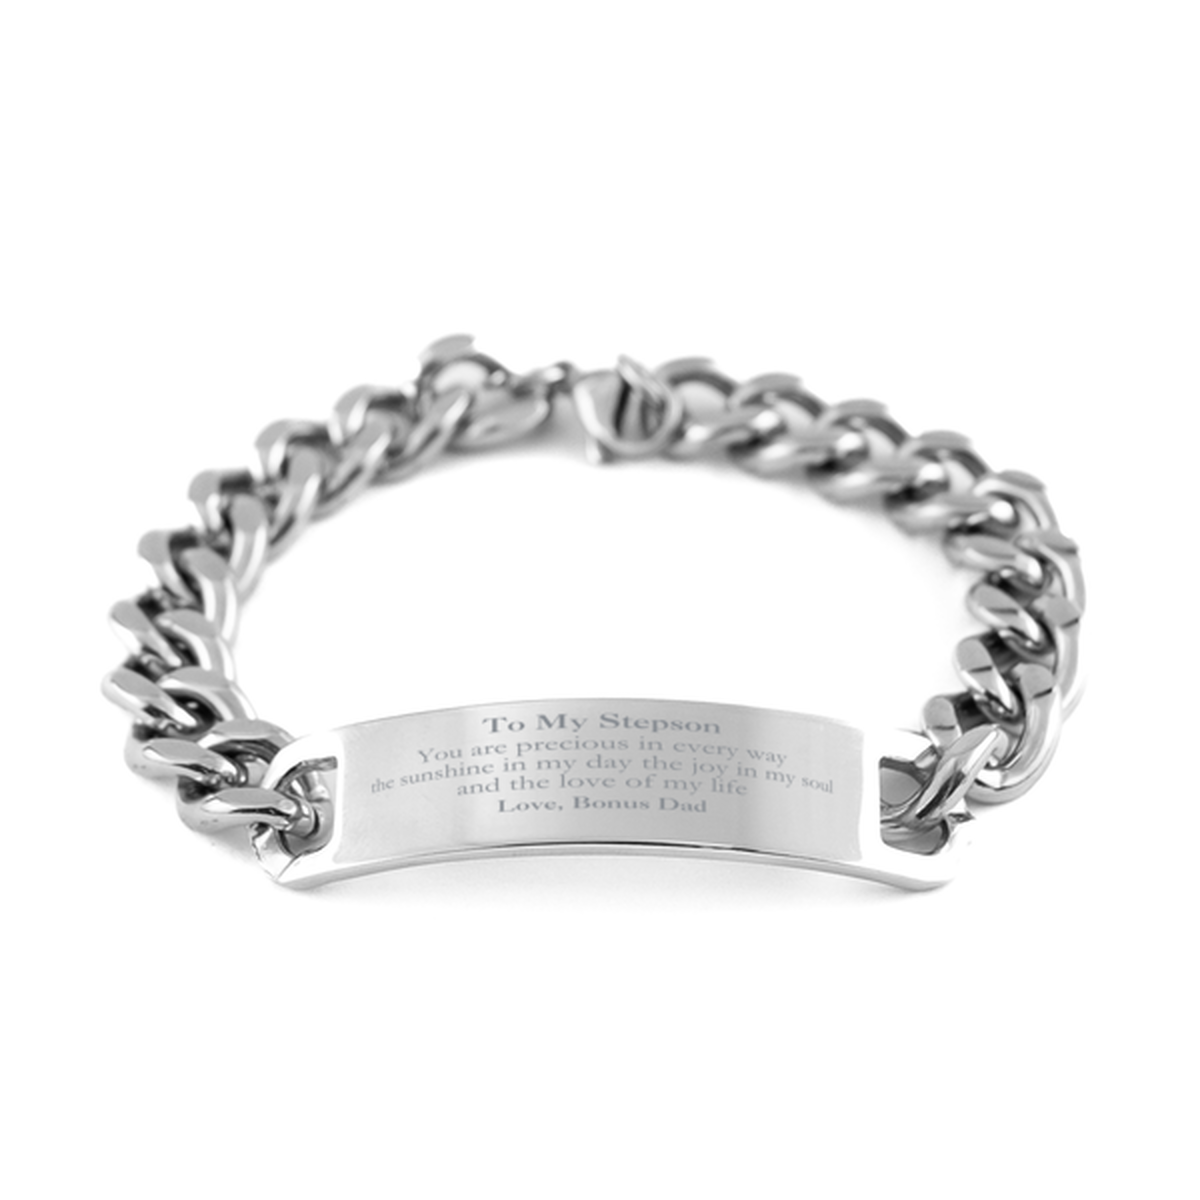 Graduation Gifts for Stepson Cuban Chain Stainless Steel Bracelet Present from Bonus Dad, Christmas Stepson Birthday Gifts Stepson You are precious in every way the sunshine in my day. Love, Bonus Dad